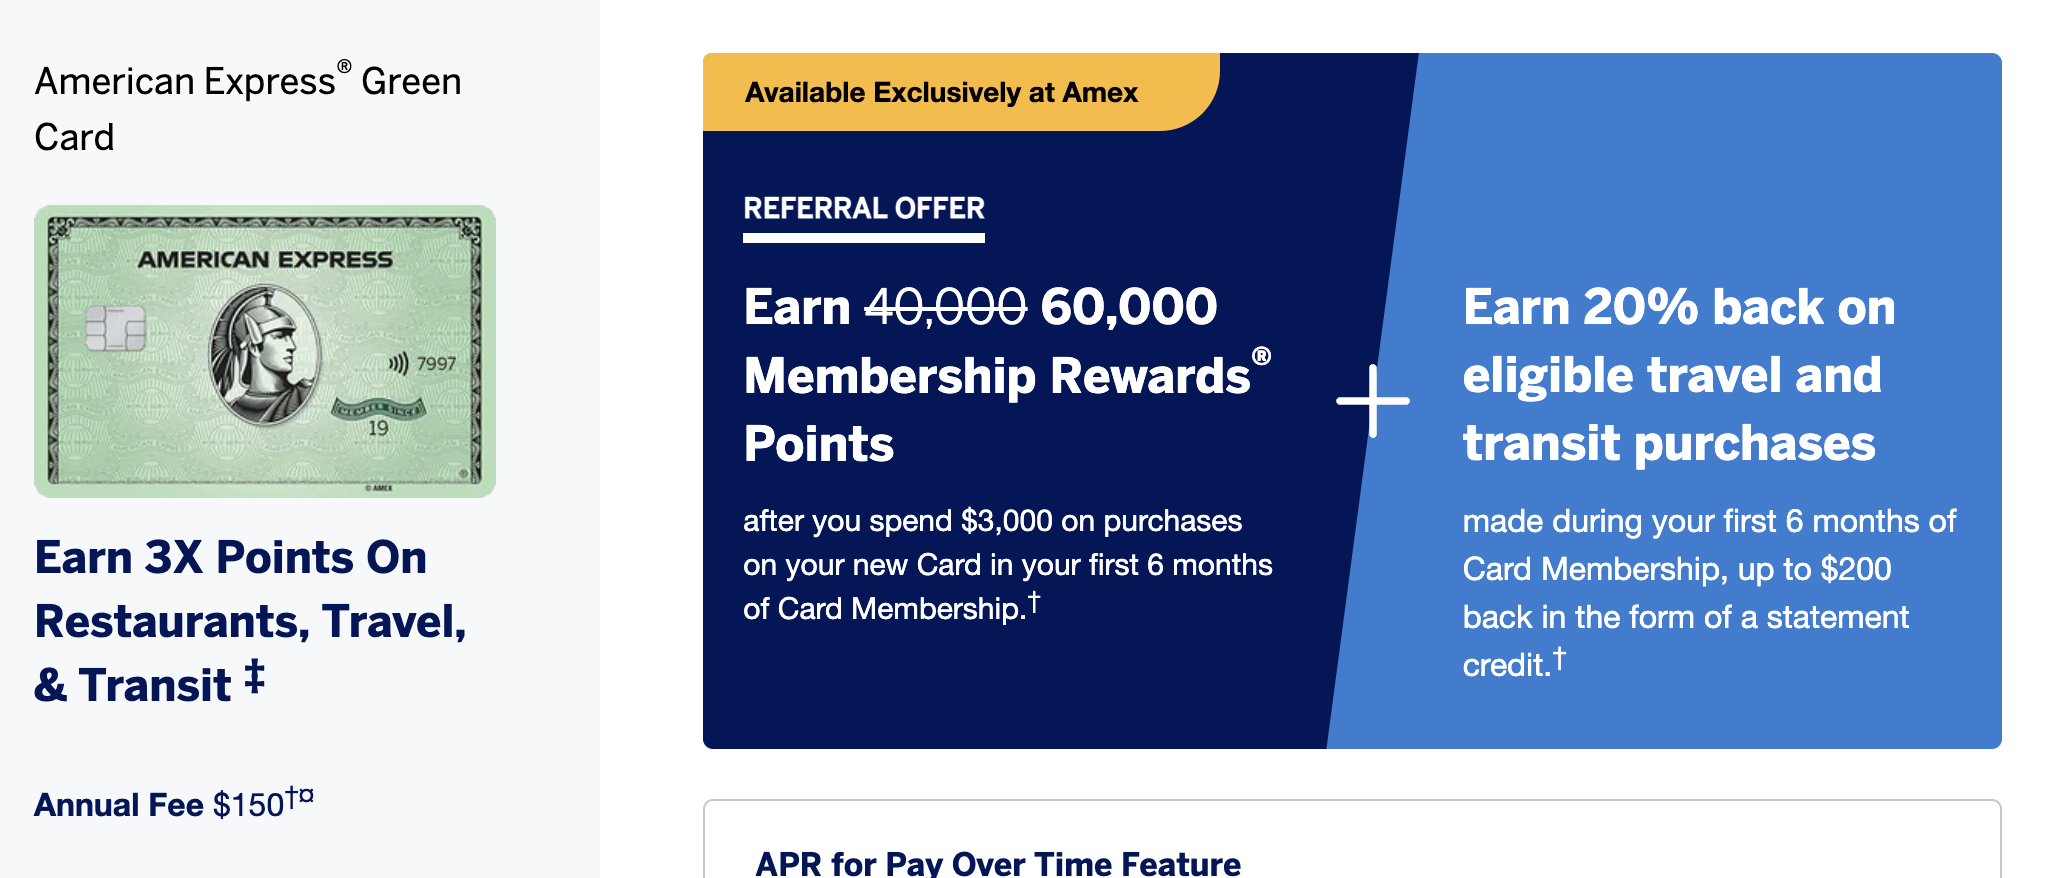 American Express Green Referal 60k + 20% back on travel and transit